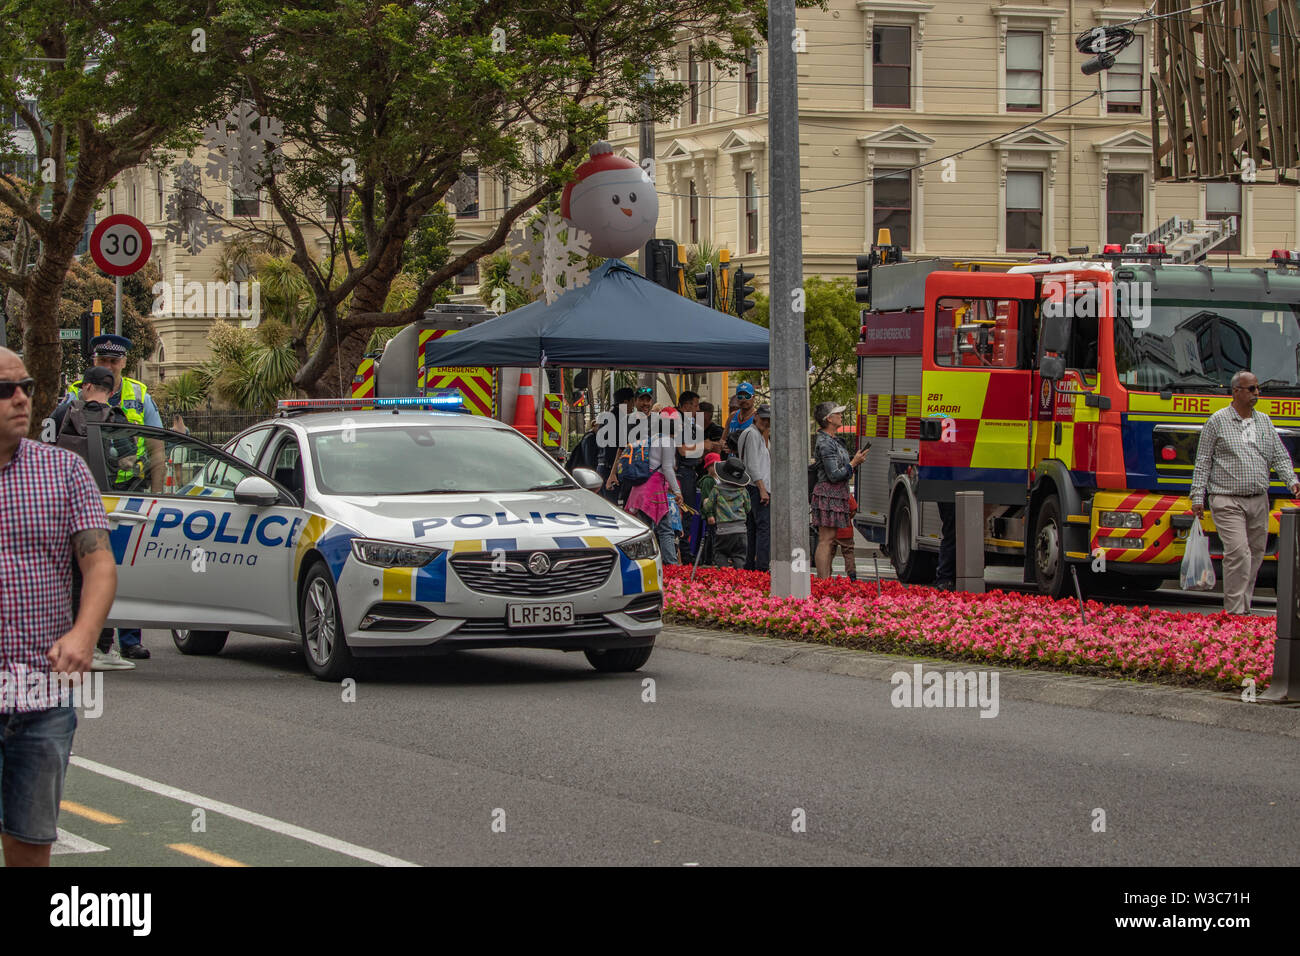 Emergency Services in support at annual Santa Parade, Wellington, New Zealand Stock Photo